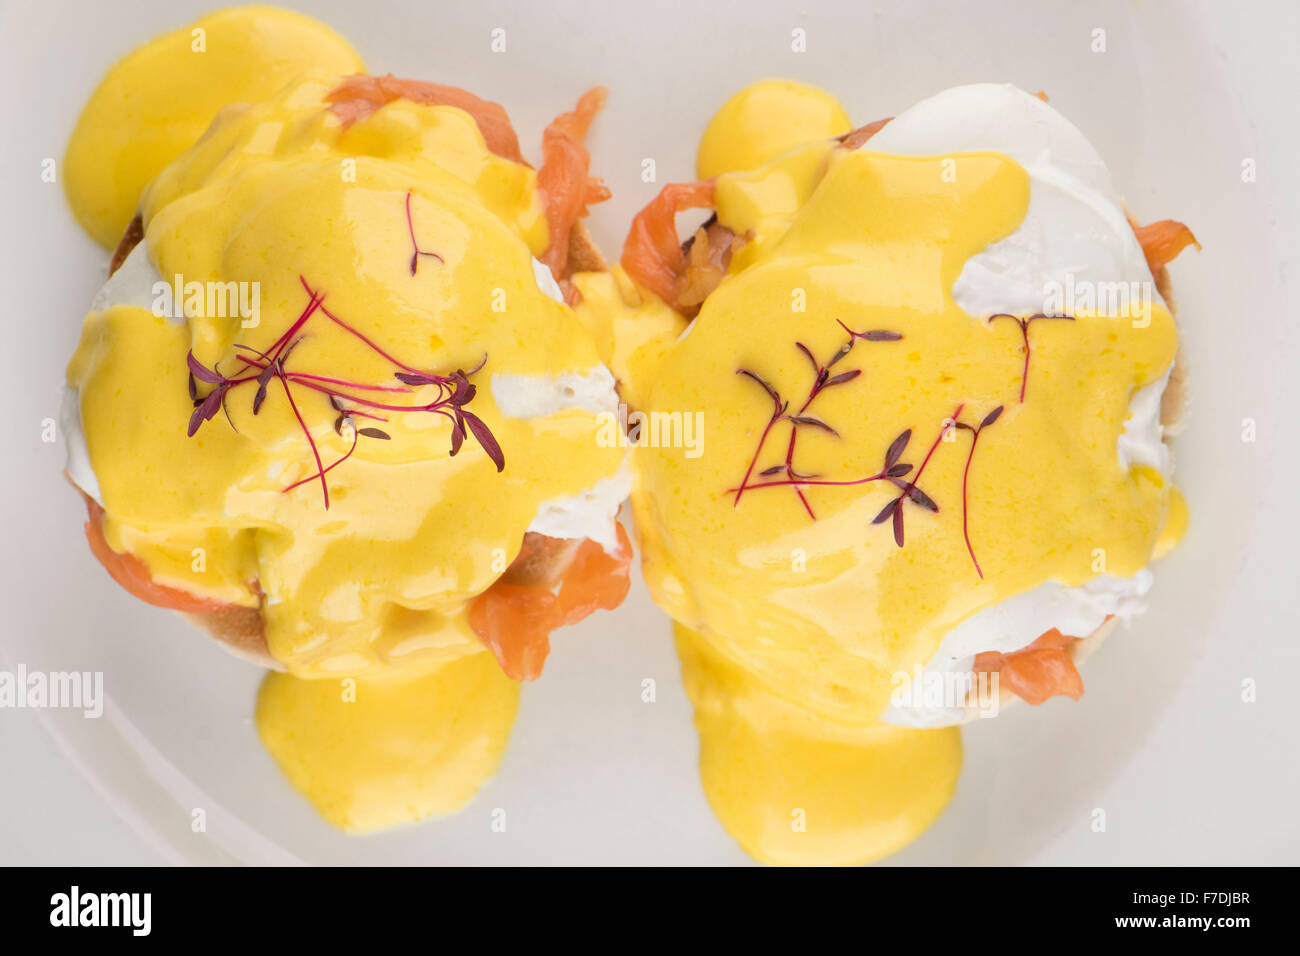 Eggs Royale breakfast consisting of an English muffin, smoked salmon and eggs with hollandaise sauce served on a white plate Stock Photo